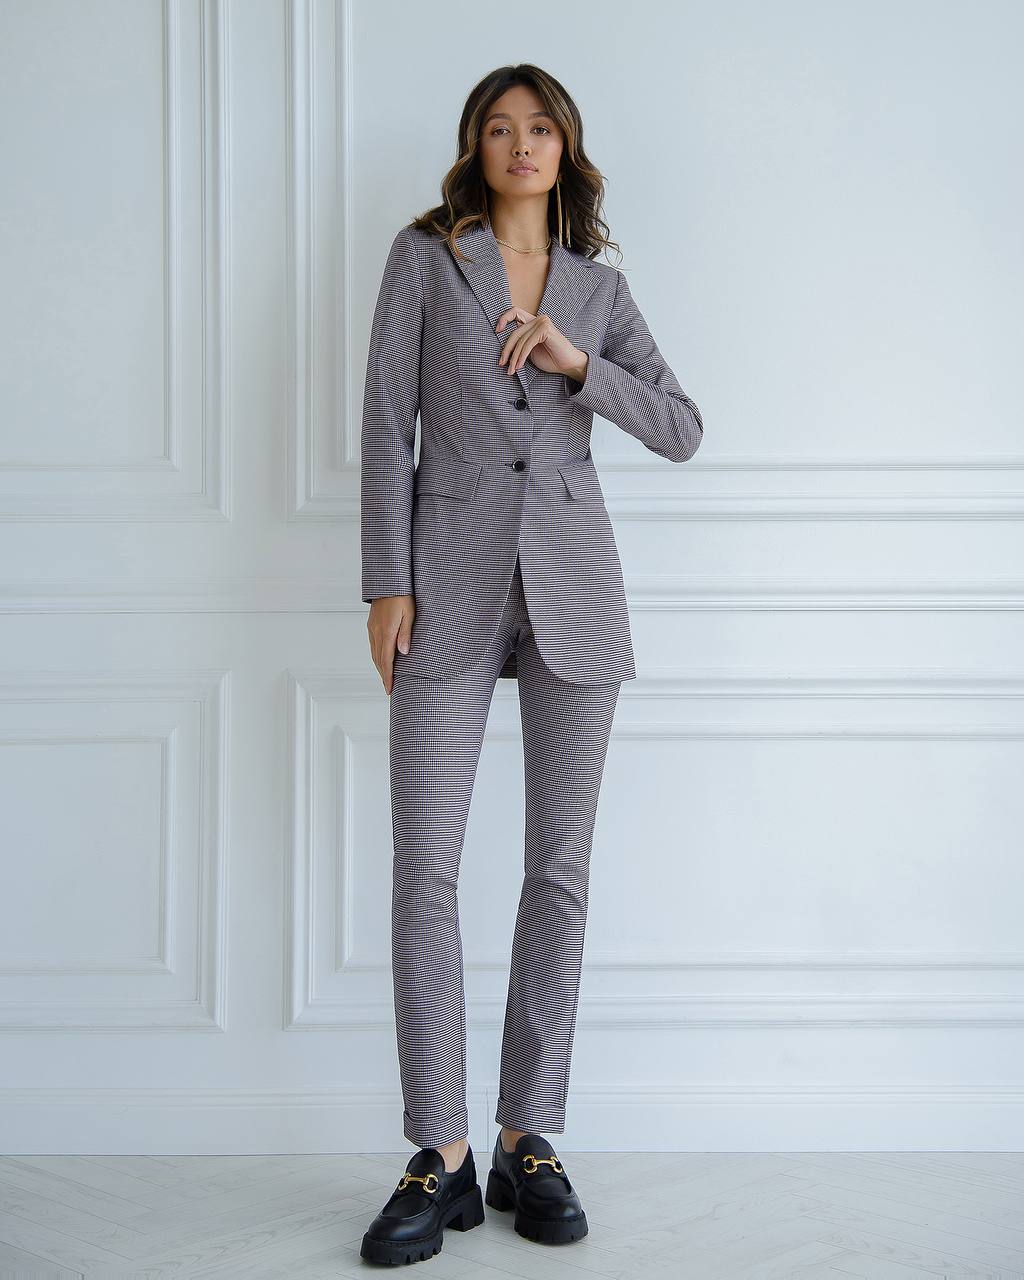 a woman in a gray suit and black shoes